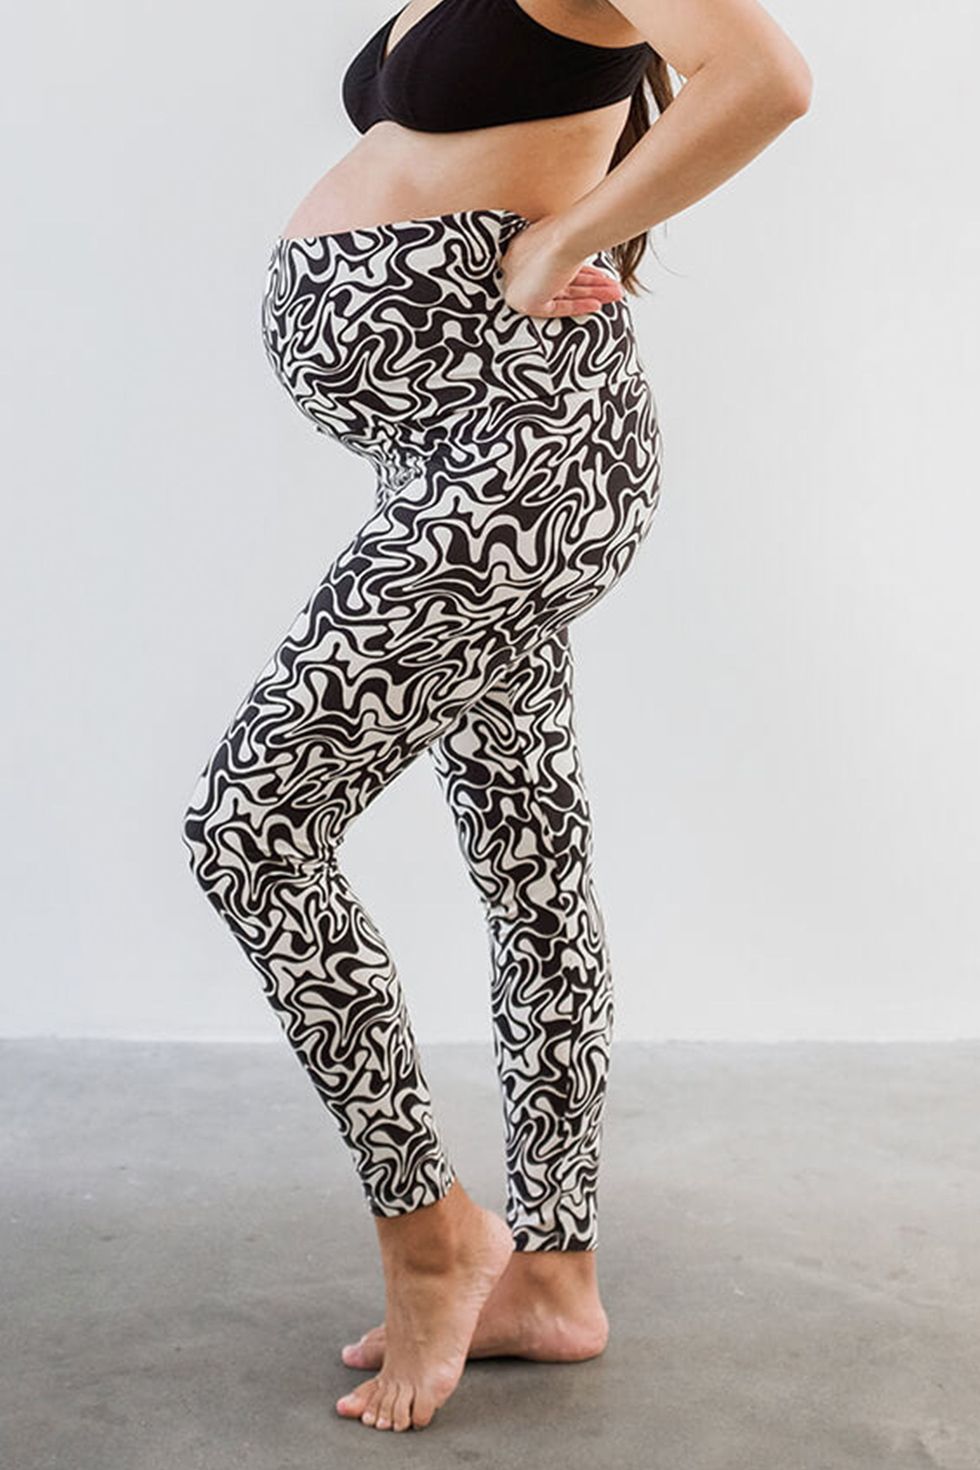 Best maternity leggings to see you through your pregnancy in